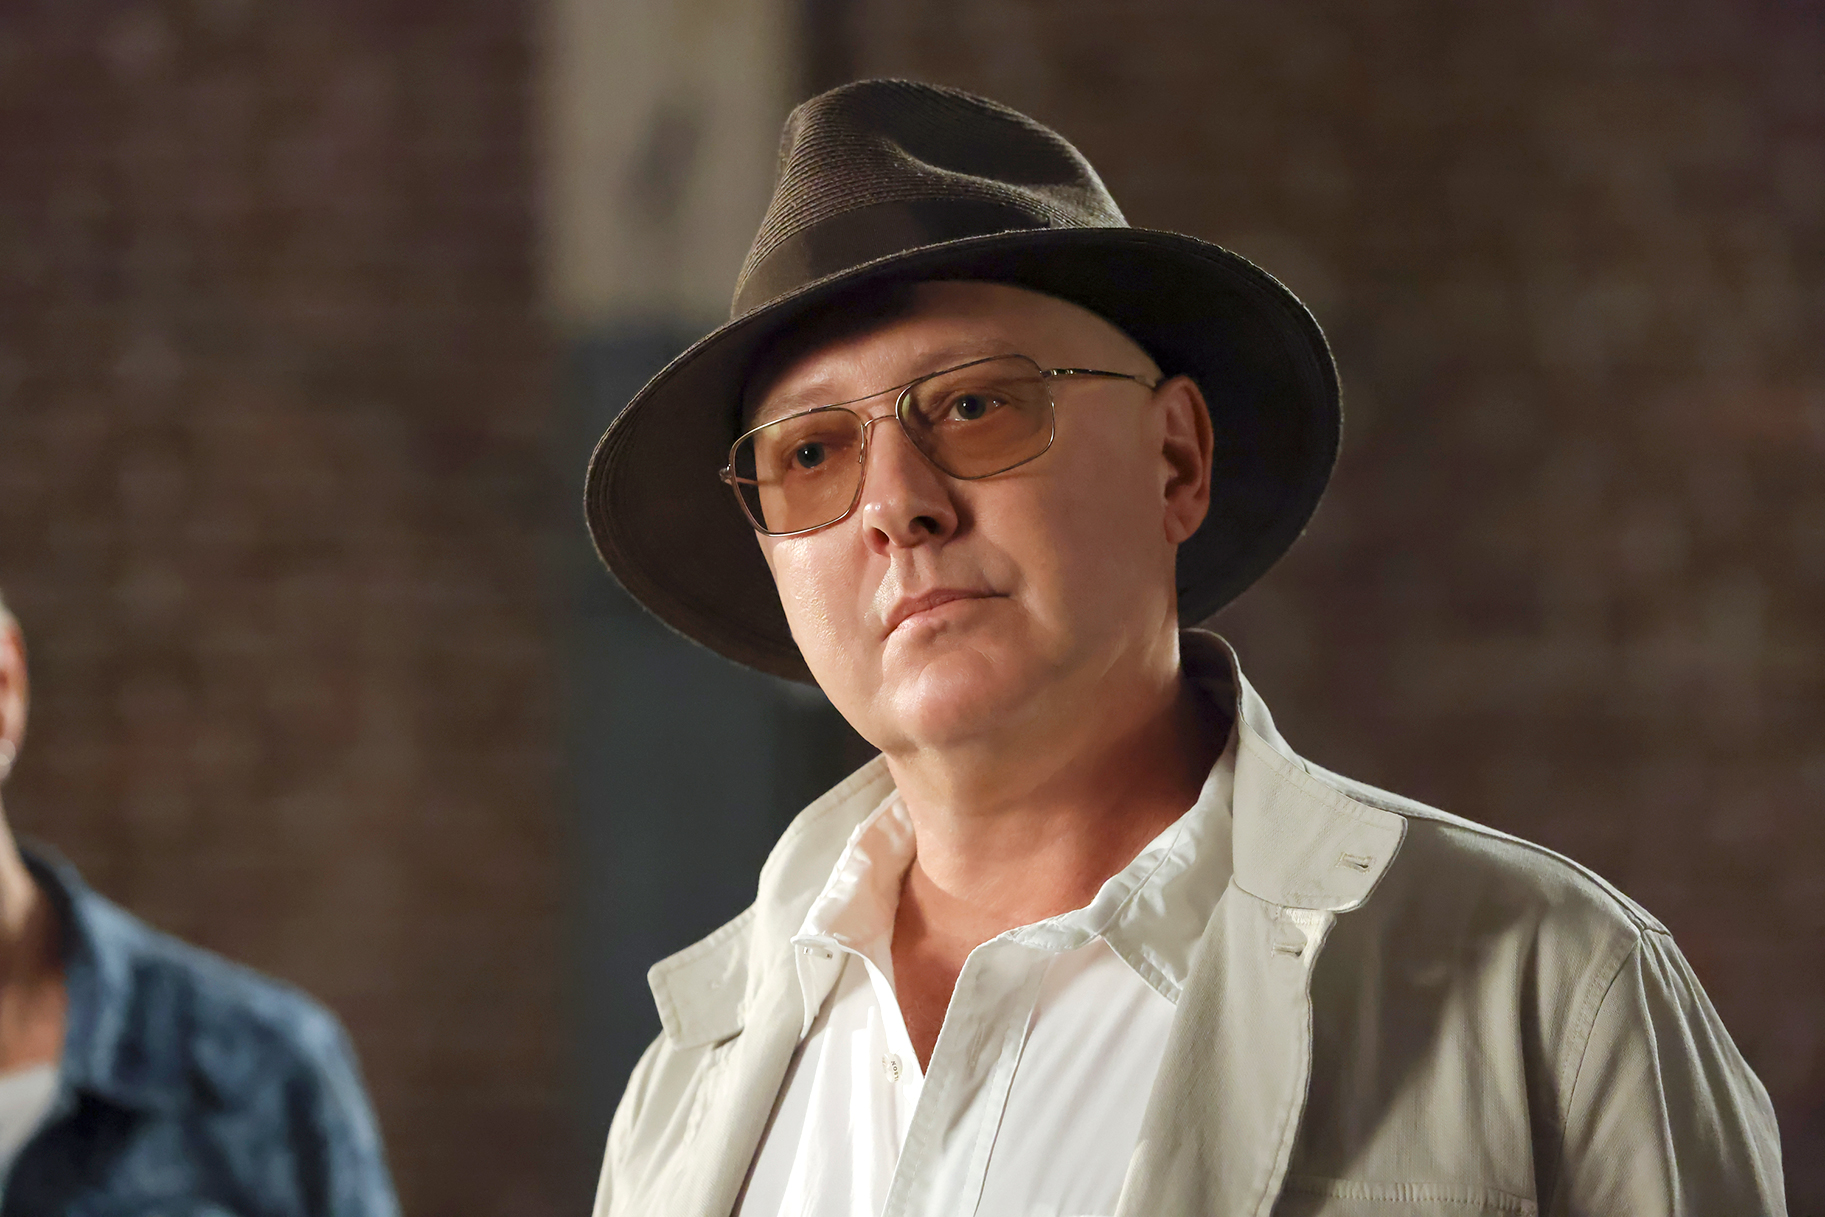 Goodbye to 'The Blacklist' A Look Back at Red's Final Stand and What's Next for Fans